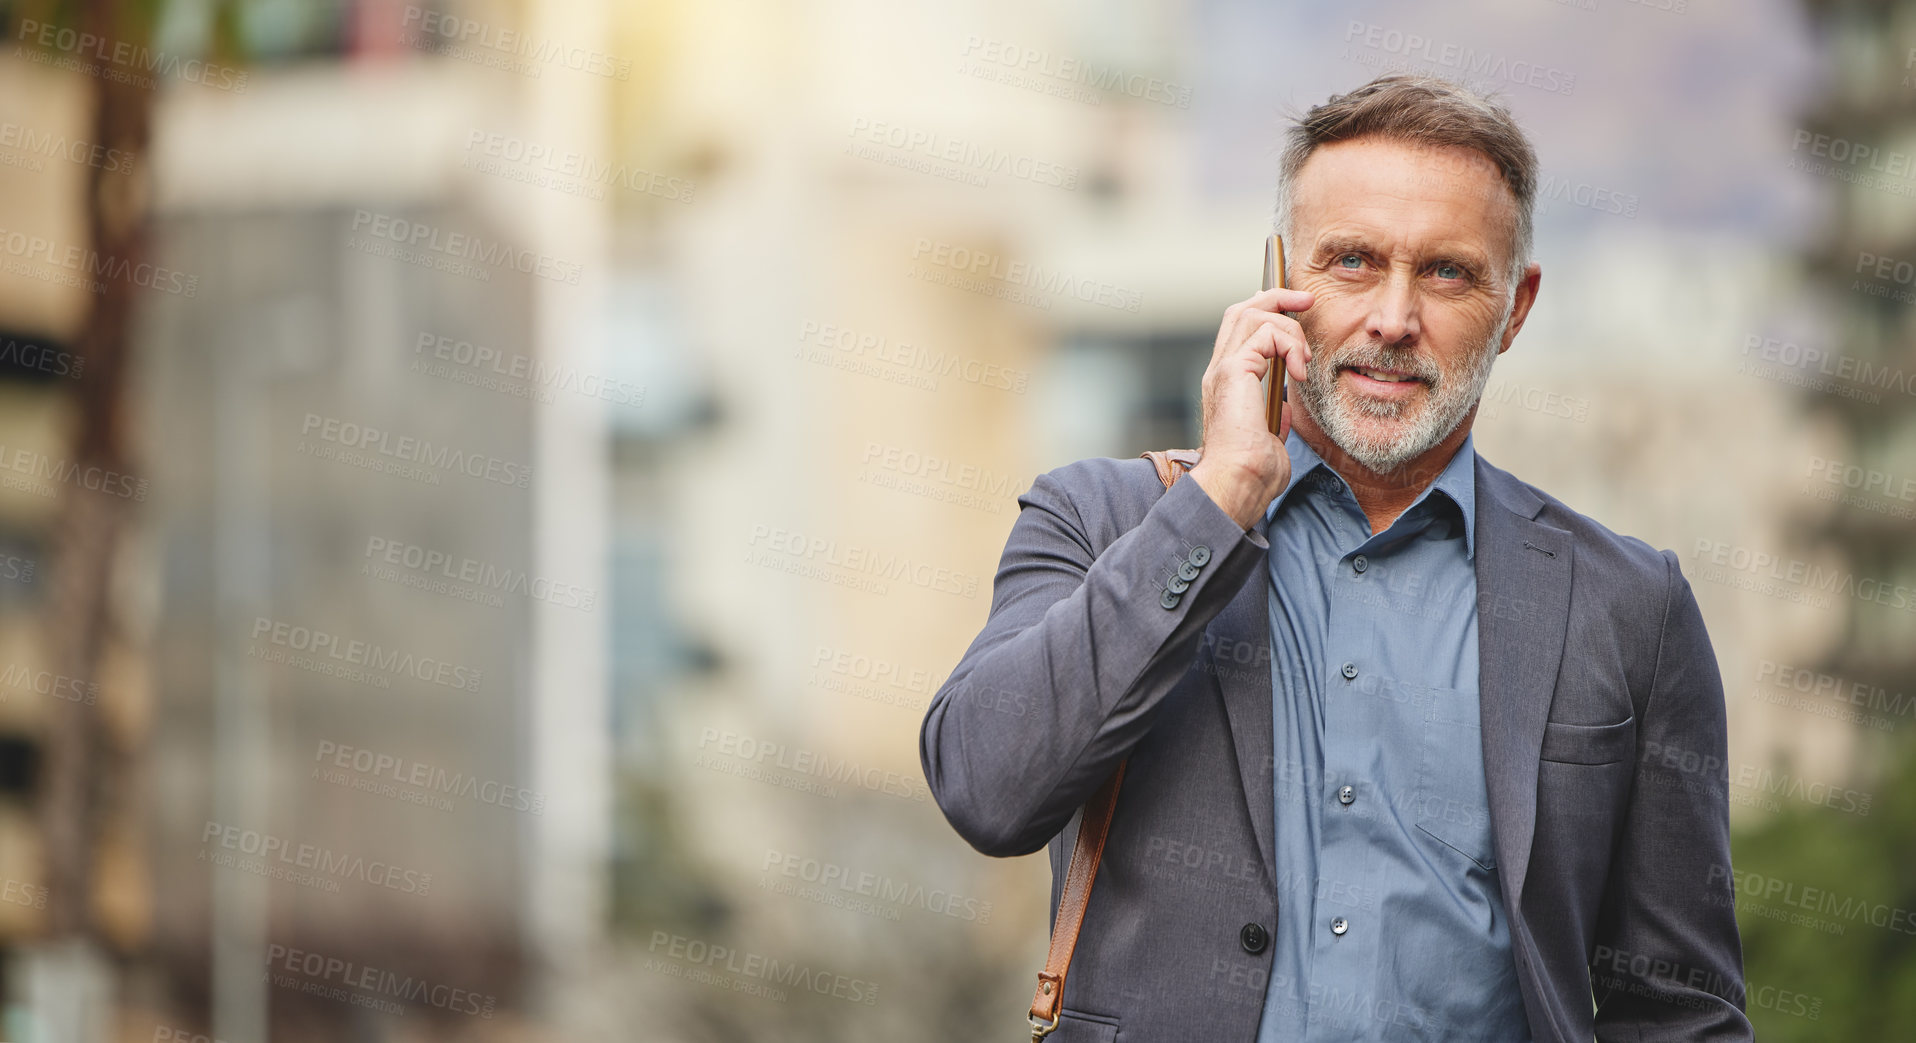 Buy stock photo Shot of a mature businessman using his smartphone to make a phone call